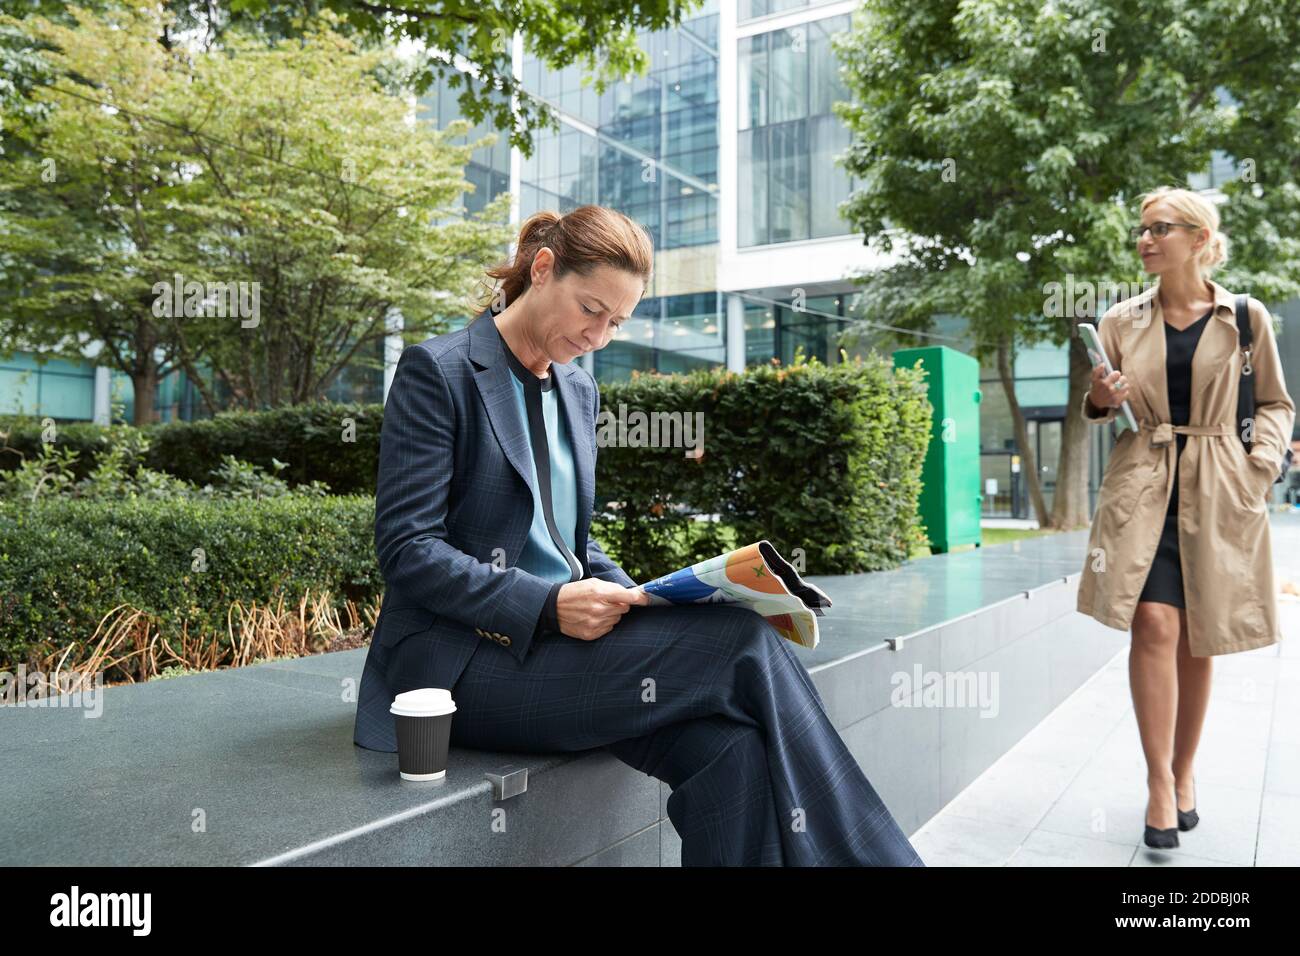 Businesswoman reading paper with colleague leaving after work at city Stock Photo